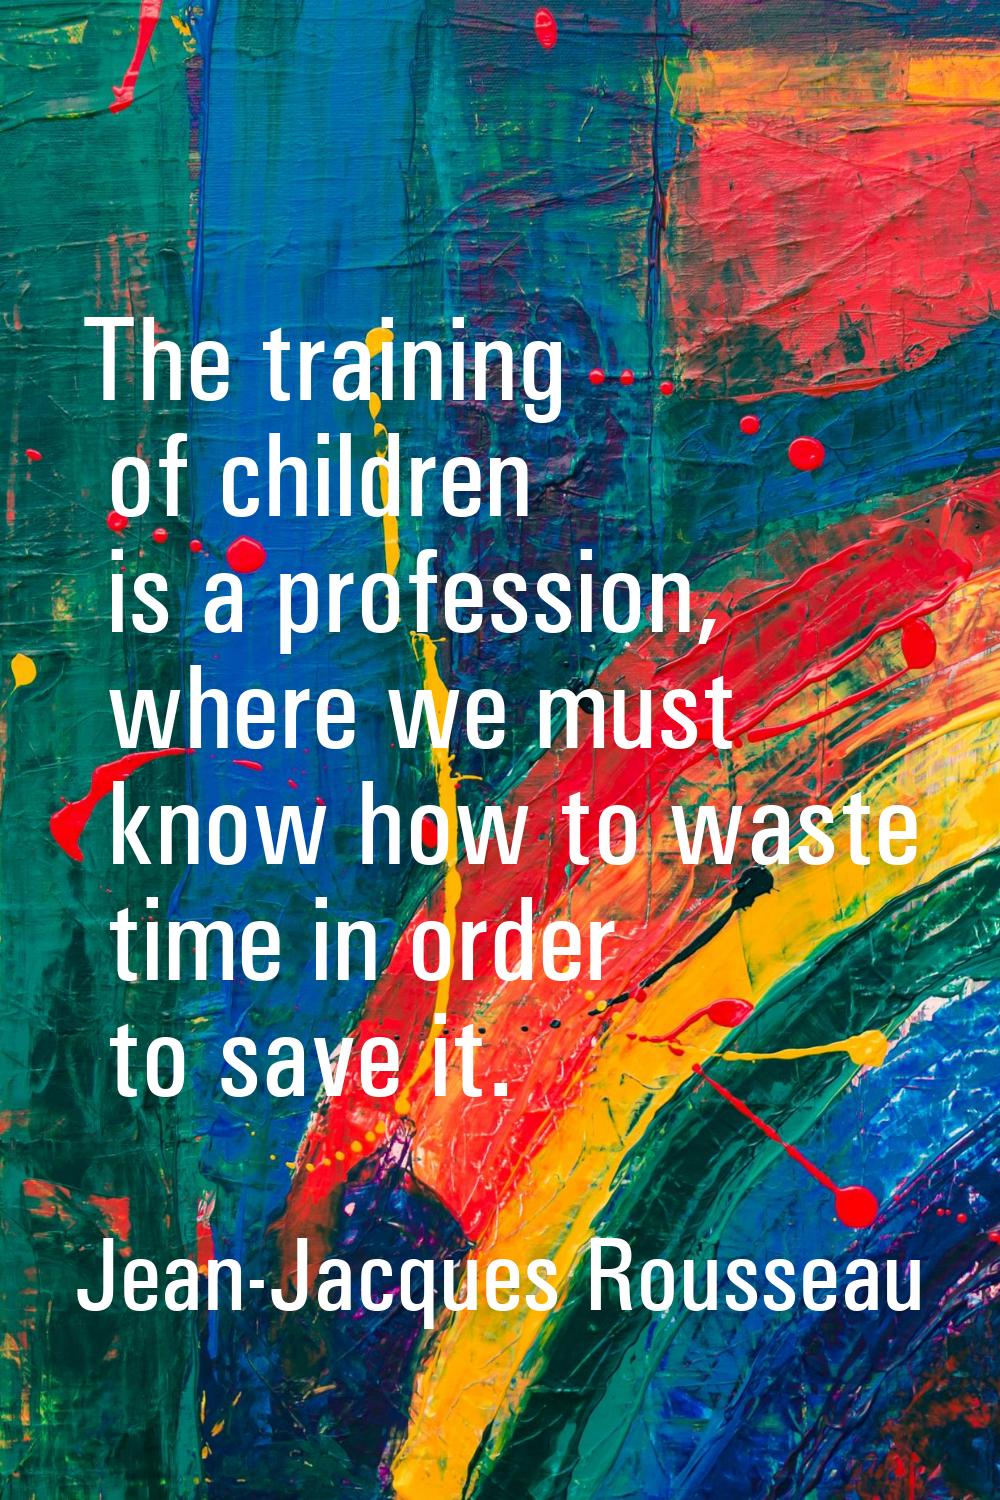 The training of children is a profession, where we must know how to waste time in order to save it.